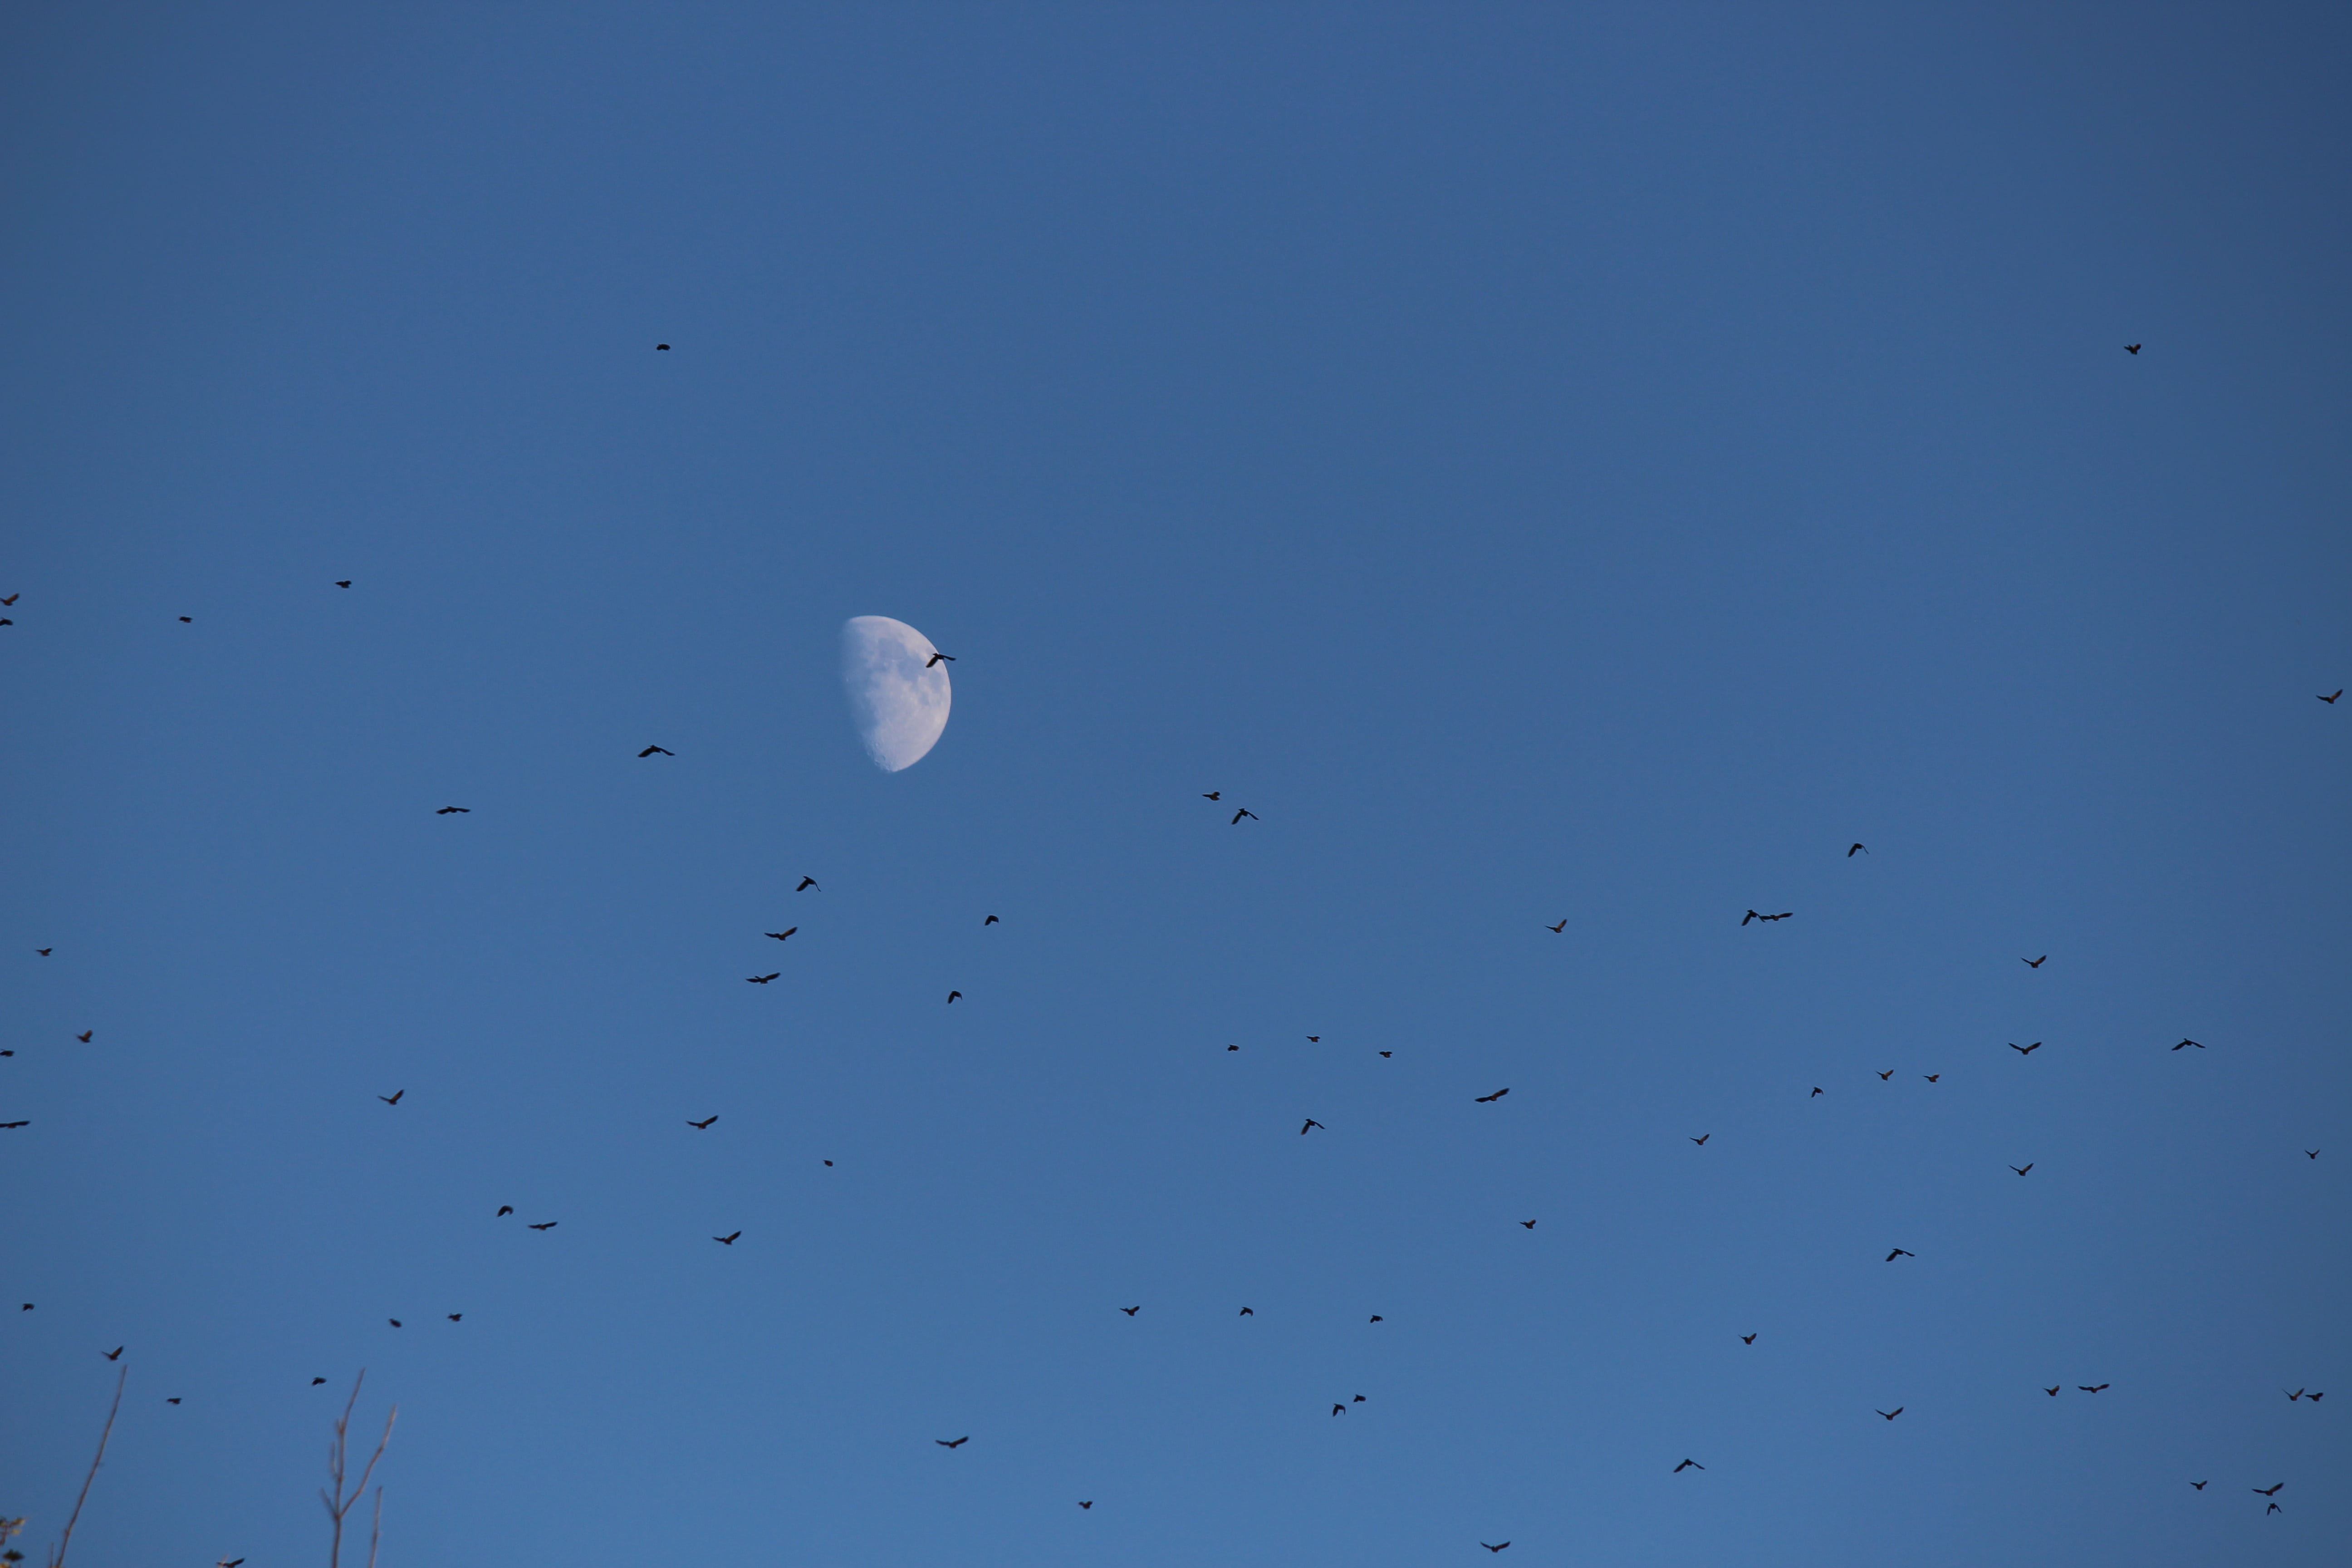 moon, birds, flock, sky, day, afternoon, waning, waxing, migrate